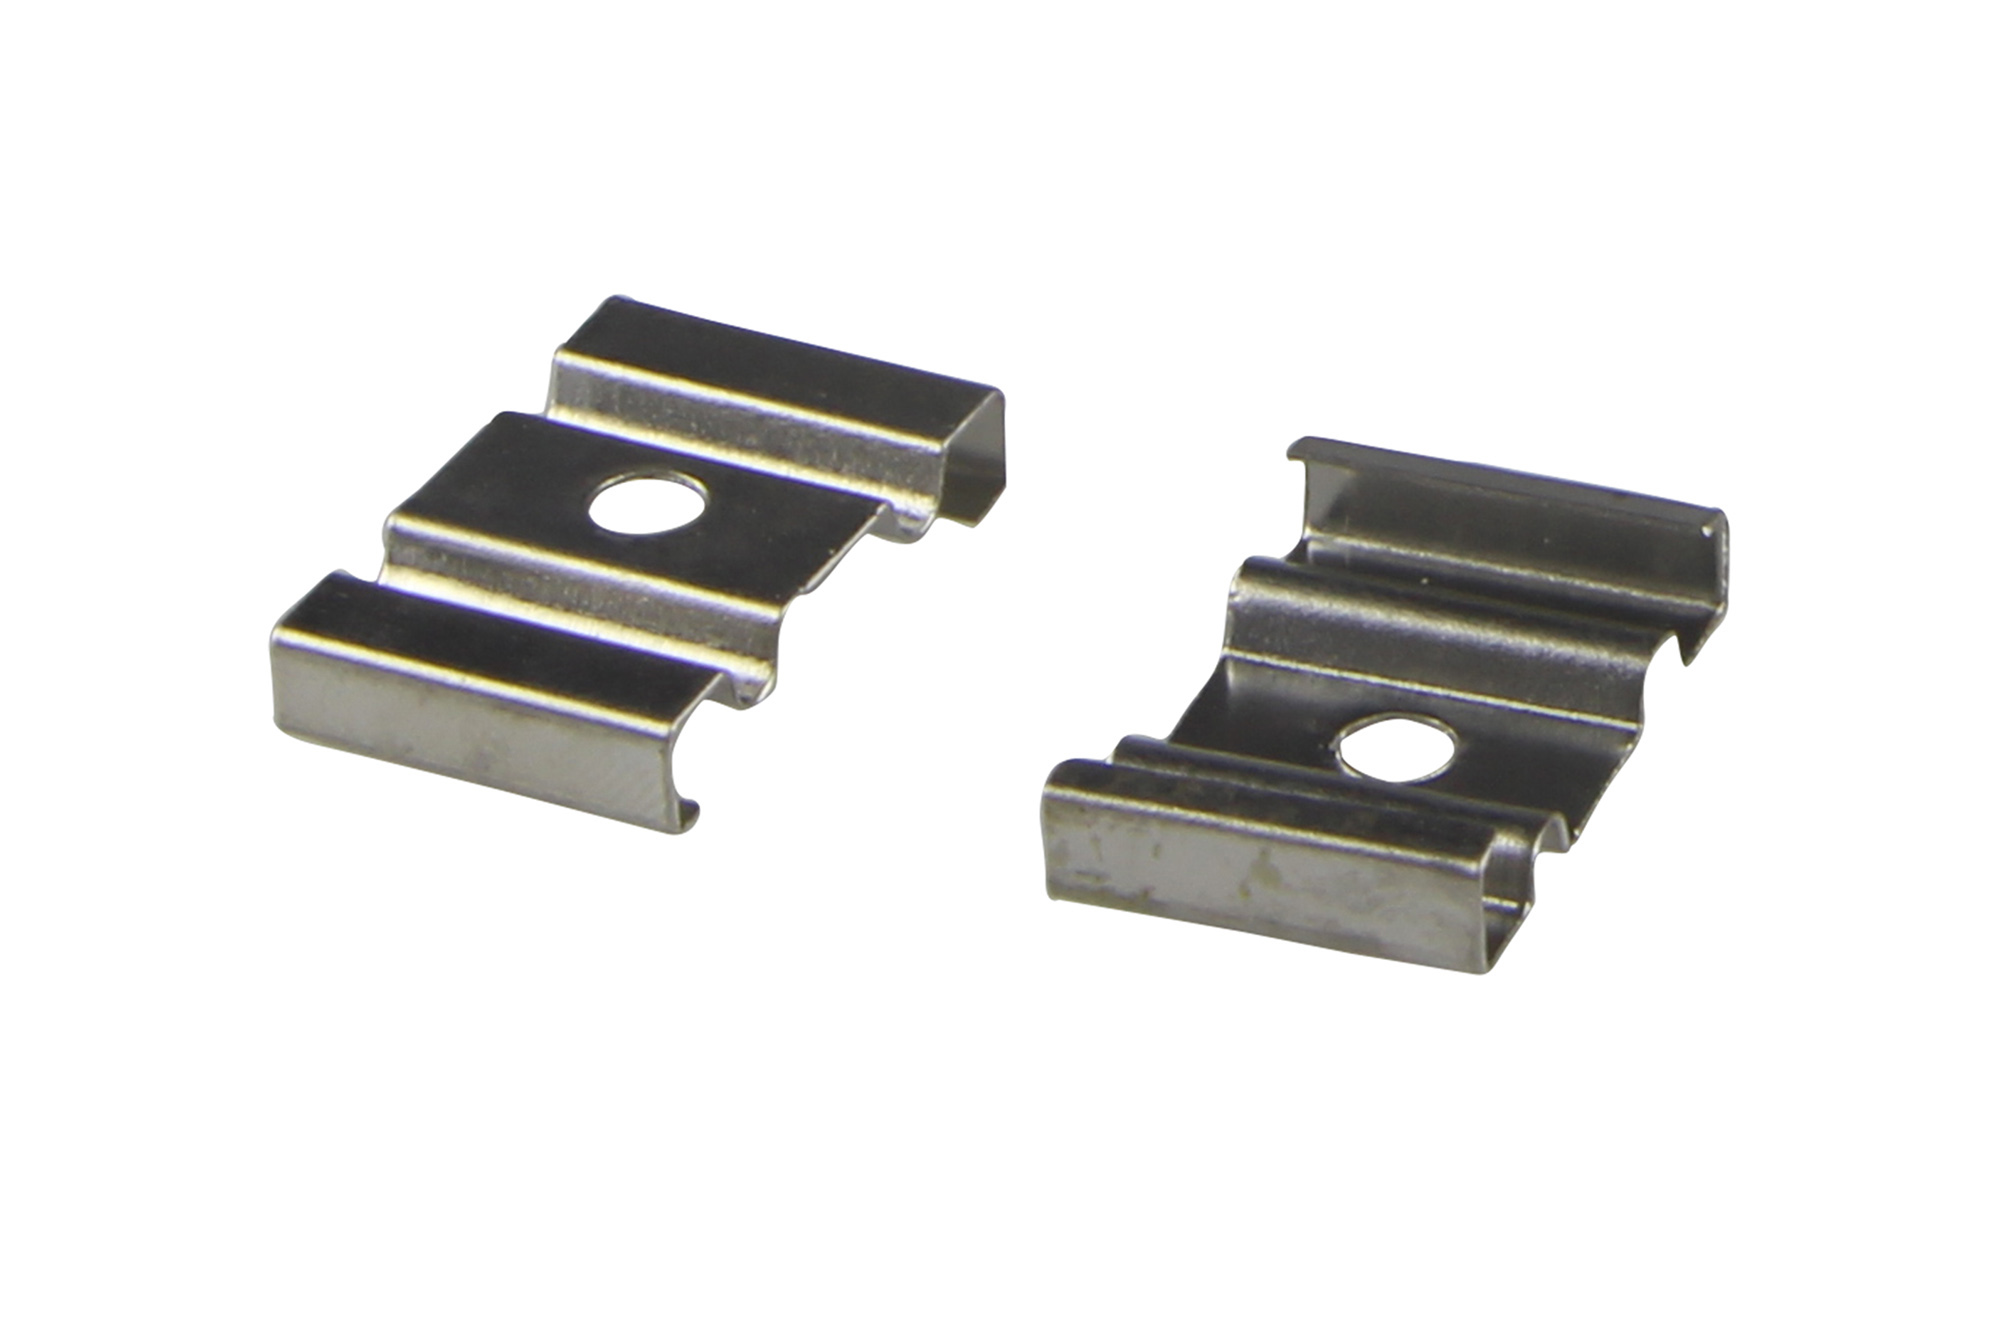 DA930162  Lin 1806; (4 pcs) Stainless Steel Mounting Bracket; Suitable For Surface Mounting DA900049; Push Fit.